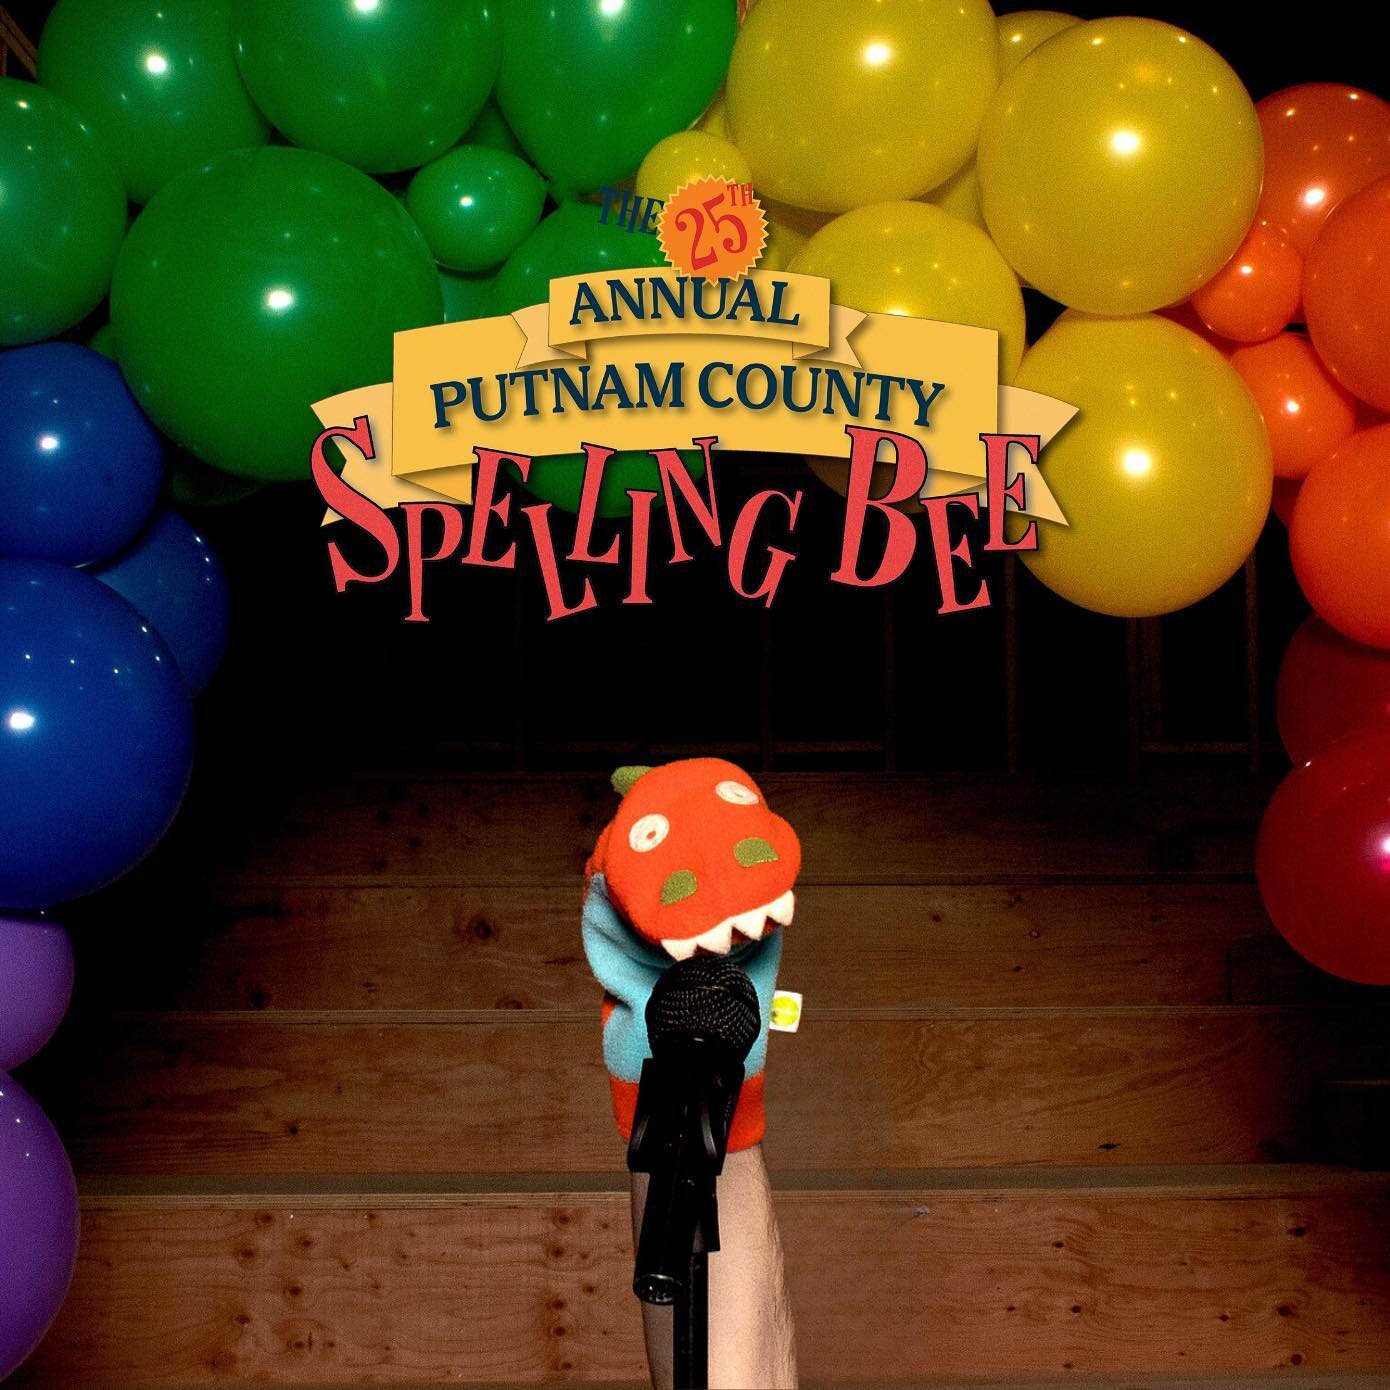 Join us tonight (and every show night) for special Spelling Bee guests! 🐲 Nigel the Puppet! 🦶The Magic Foot! 👤 You(?)!

Tickets for THE 25TH ANNUAL PUTNAM COUNTY SPELLING BEE are available online now or at the door each night. Find the word, defin